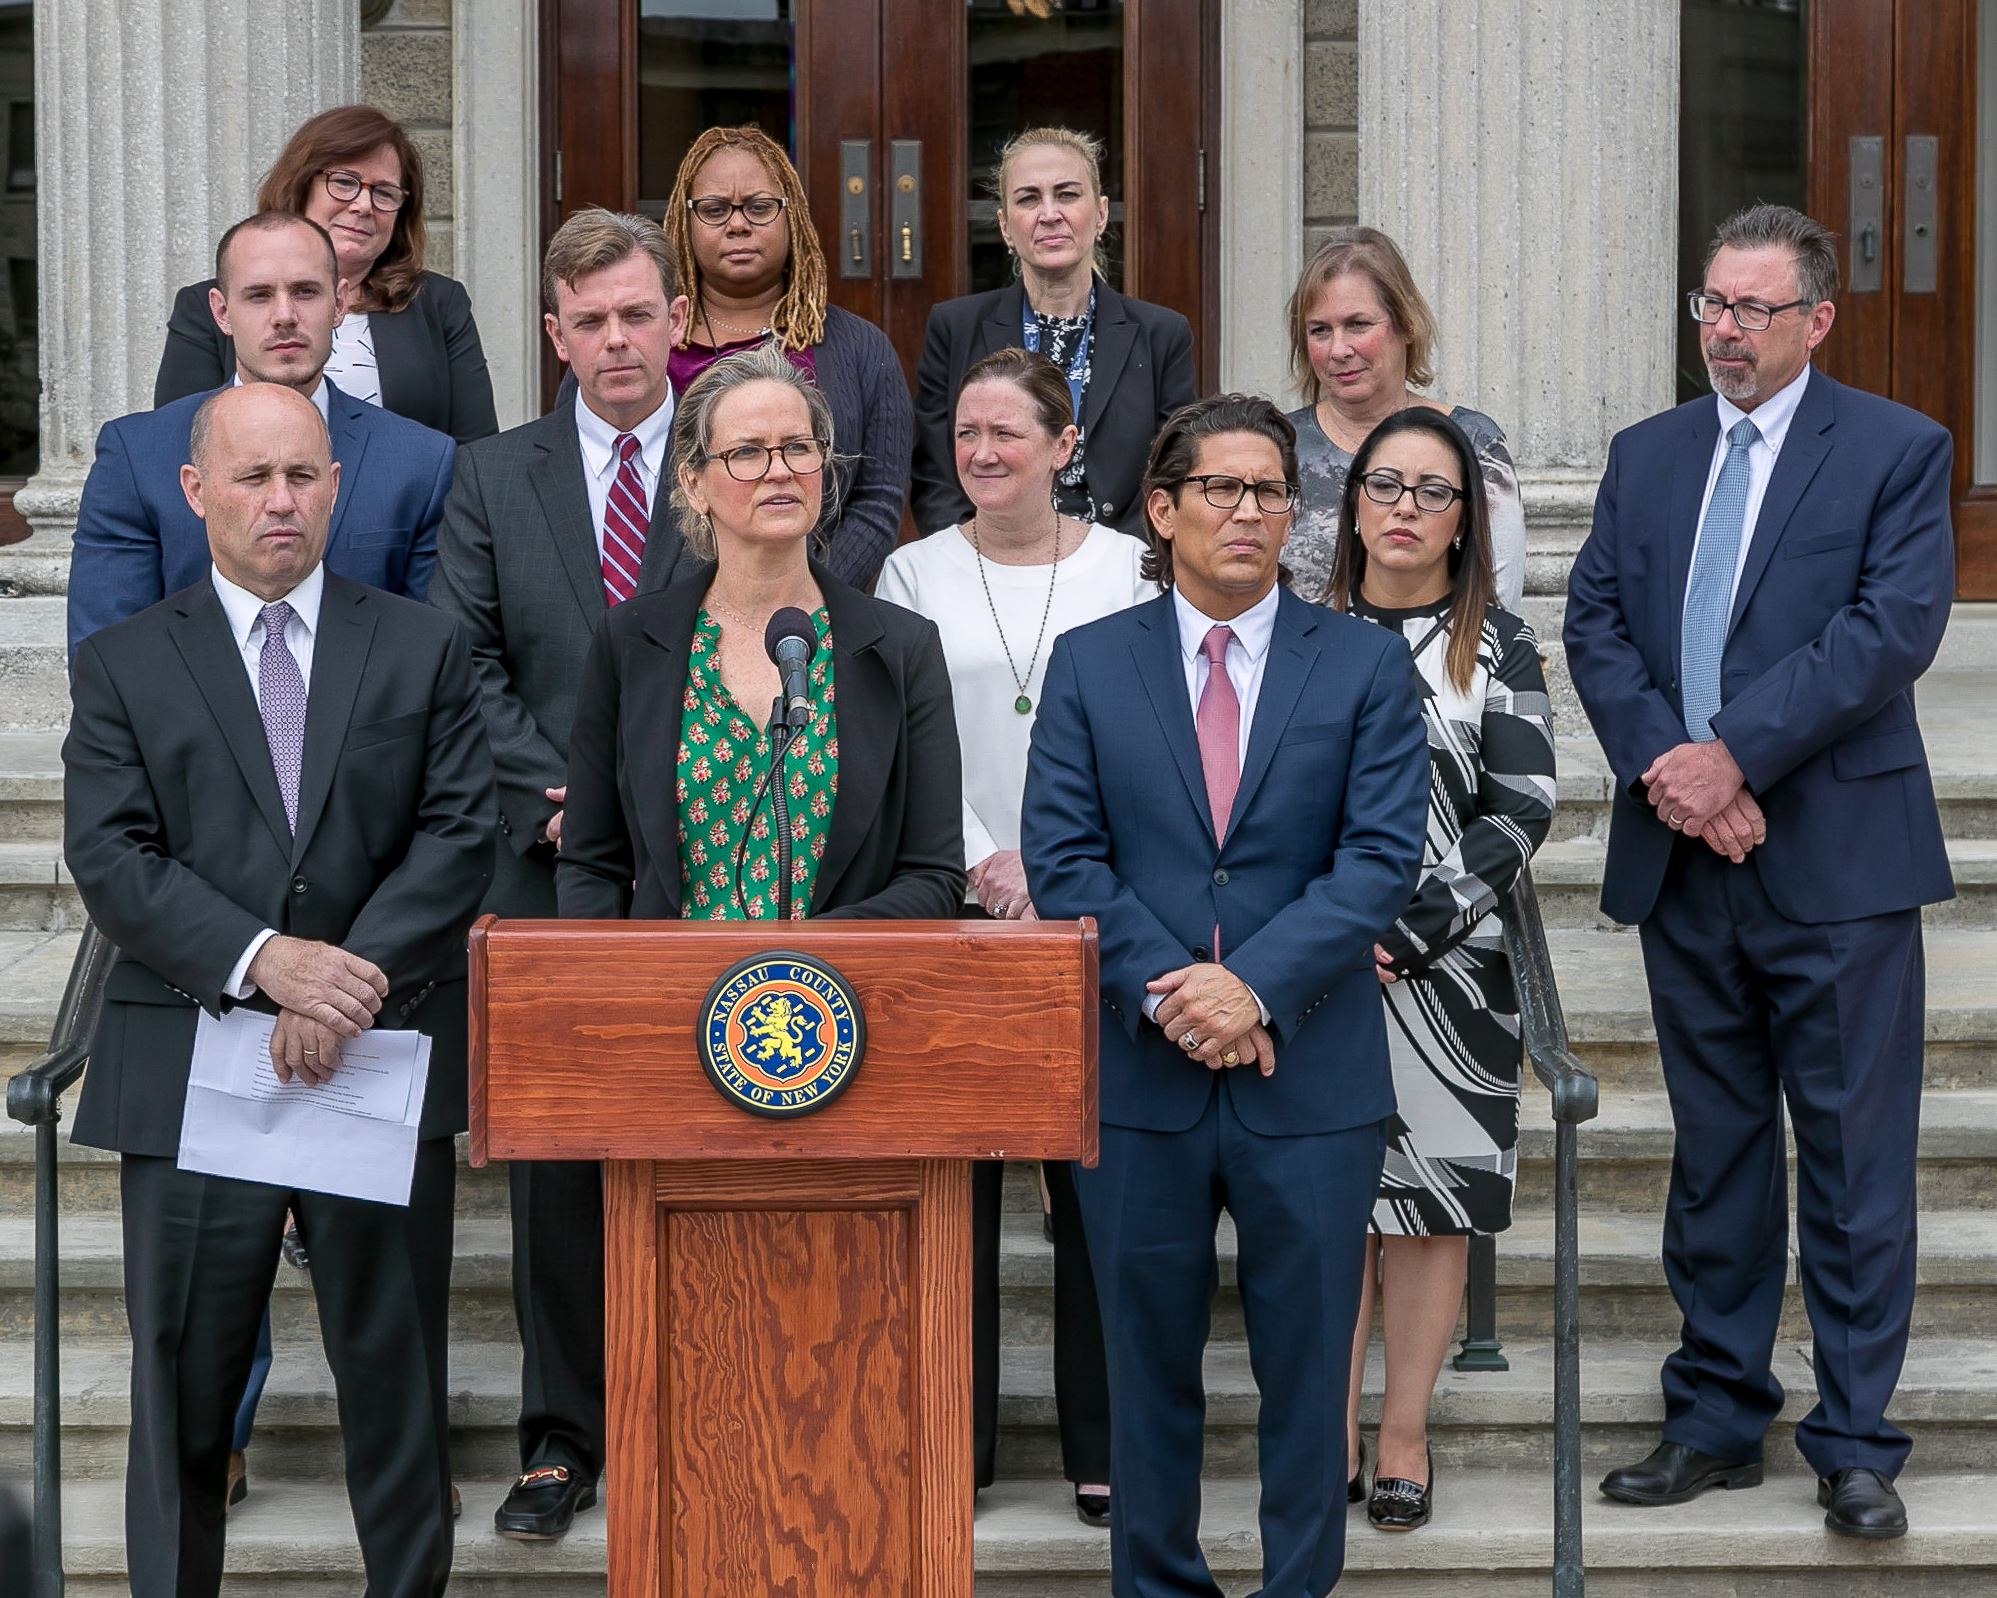 2019-05-09 Press Conference Re Opioid Crisis Action Plan-6546